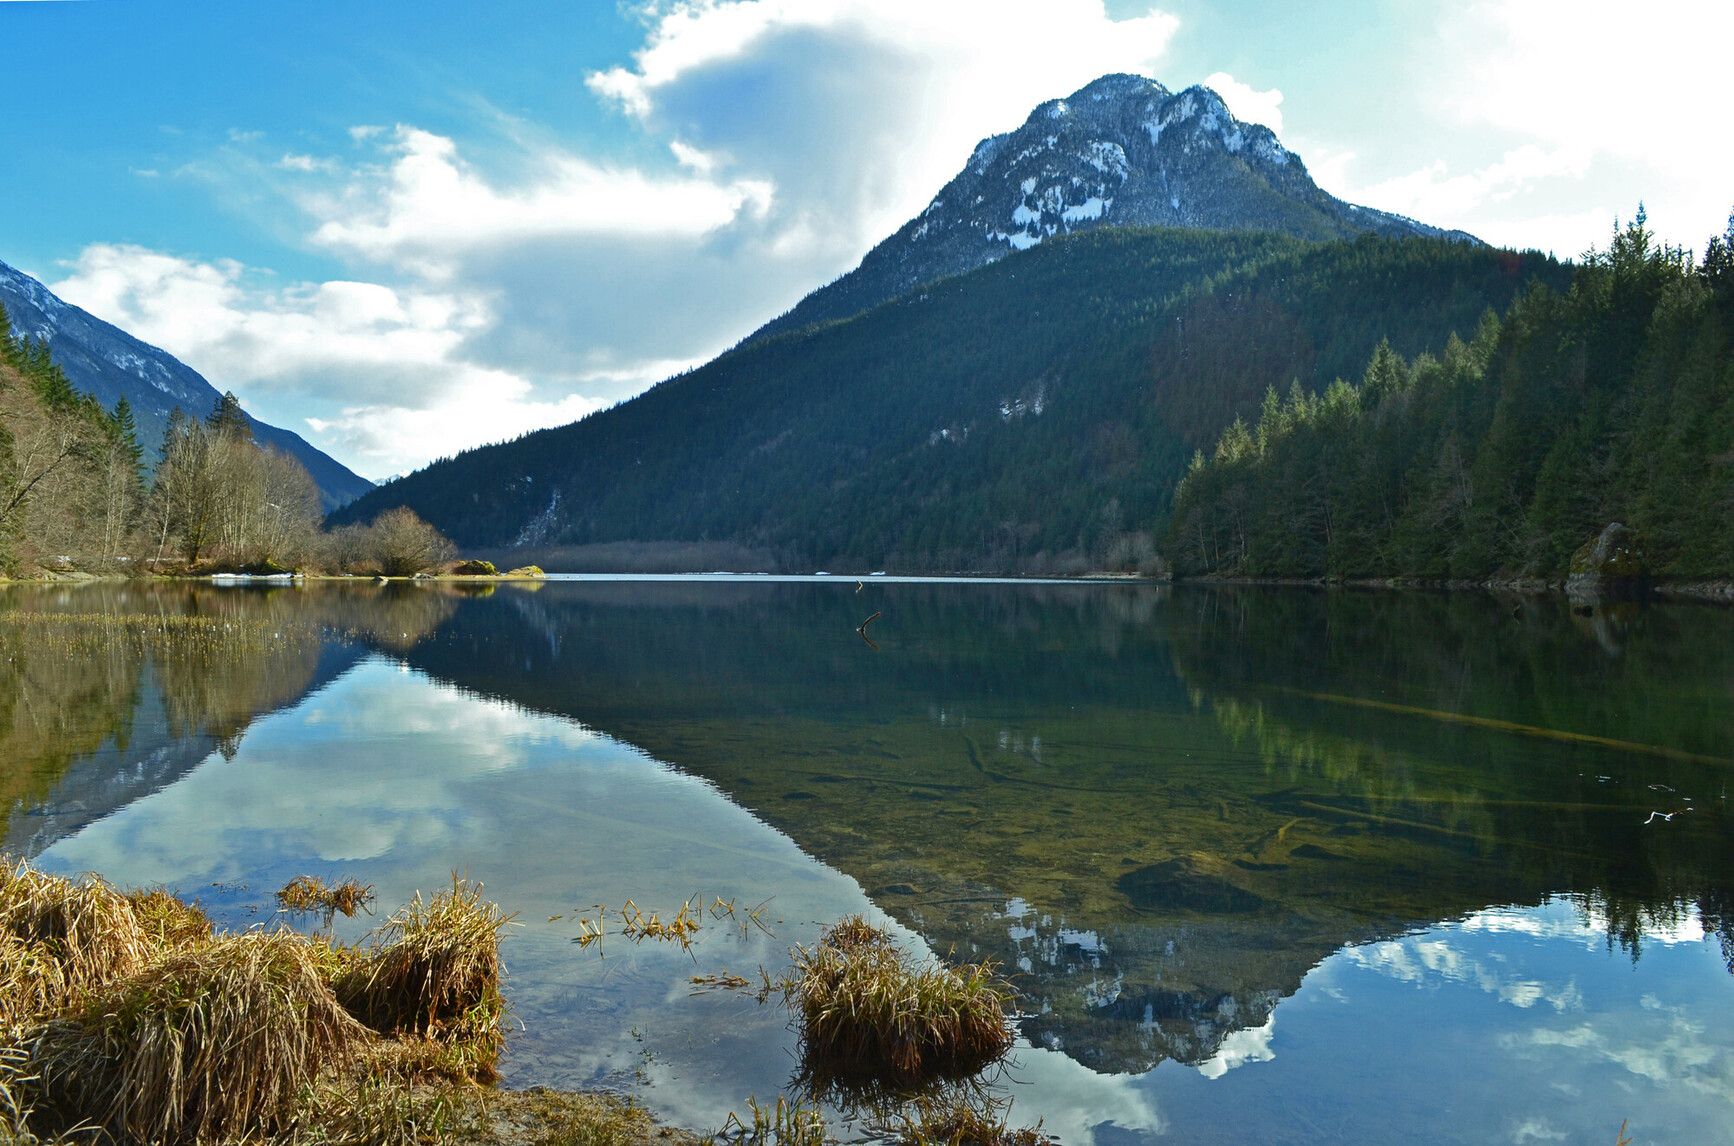 Mountains and forests surround the lake, reflecting on its still surface at Silver Lake Park